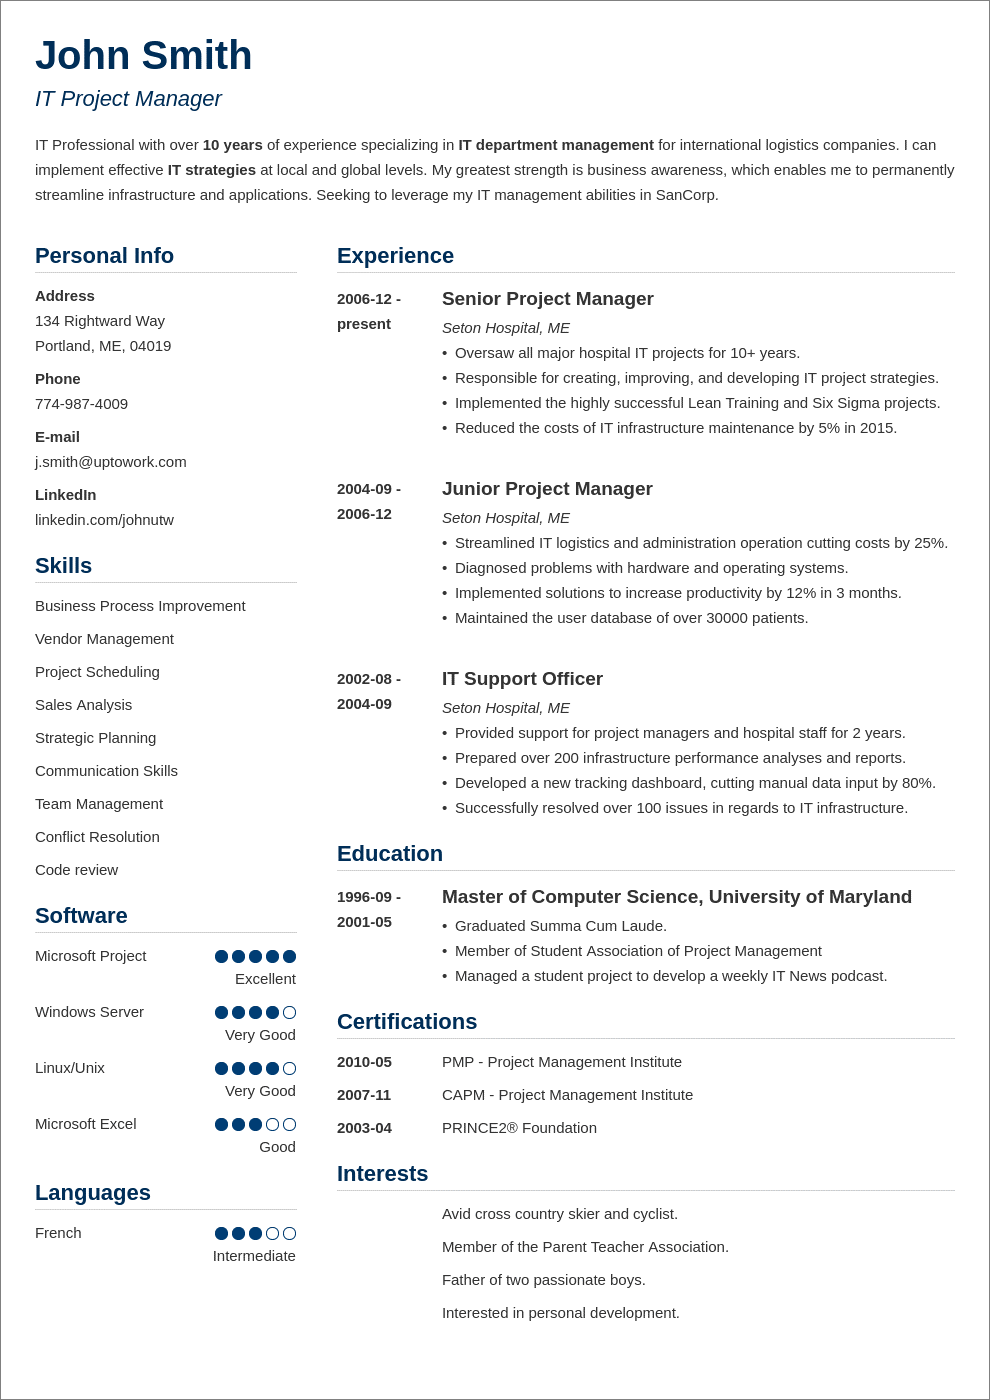 Resume Template On Word from cdn-images.zety.com